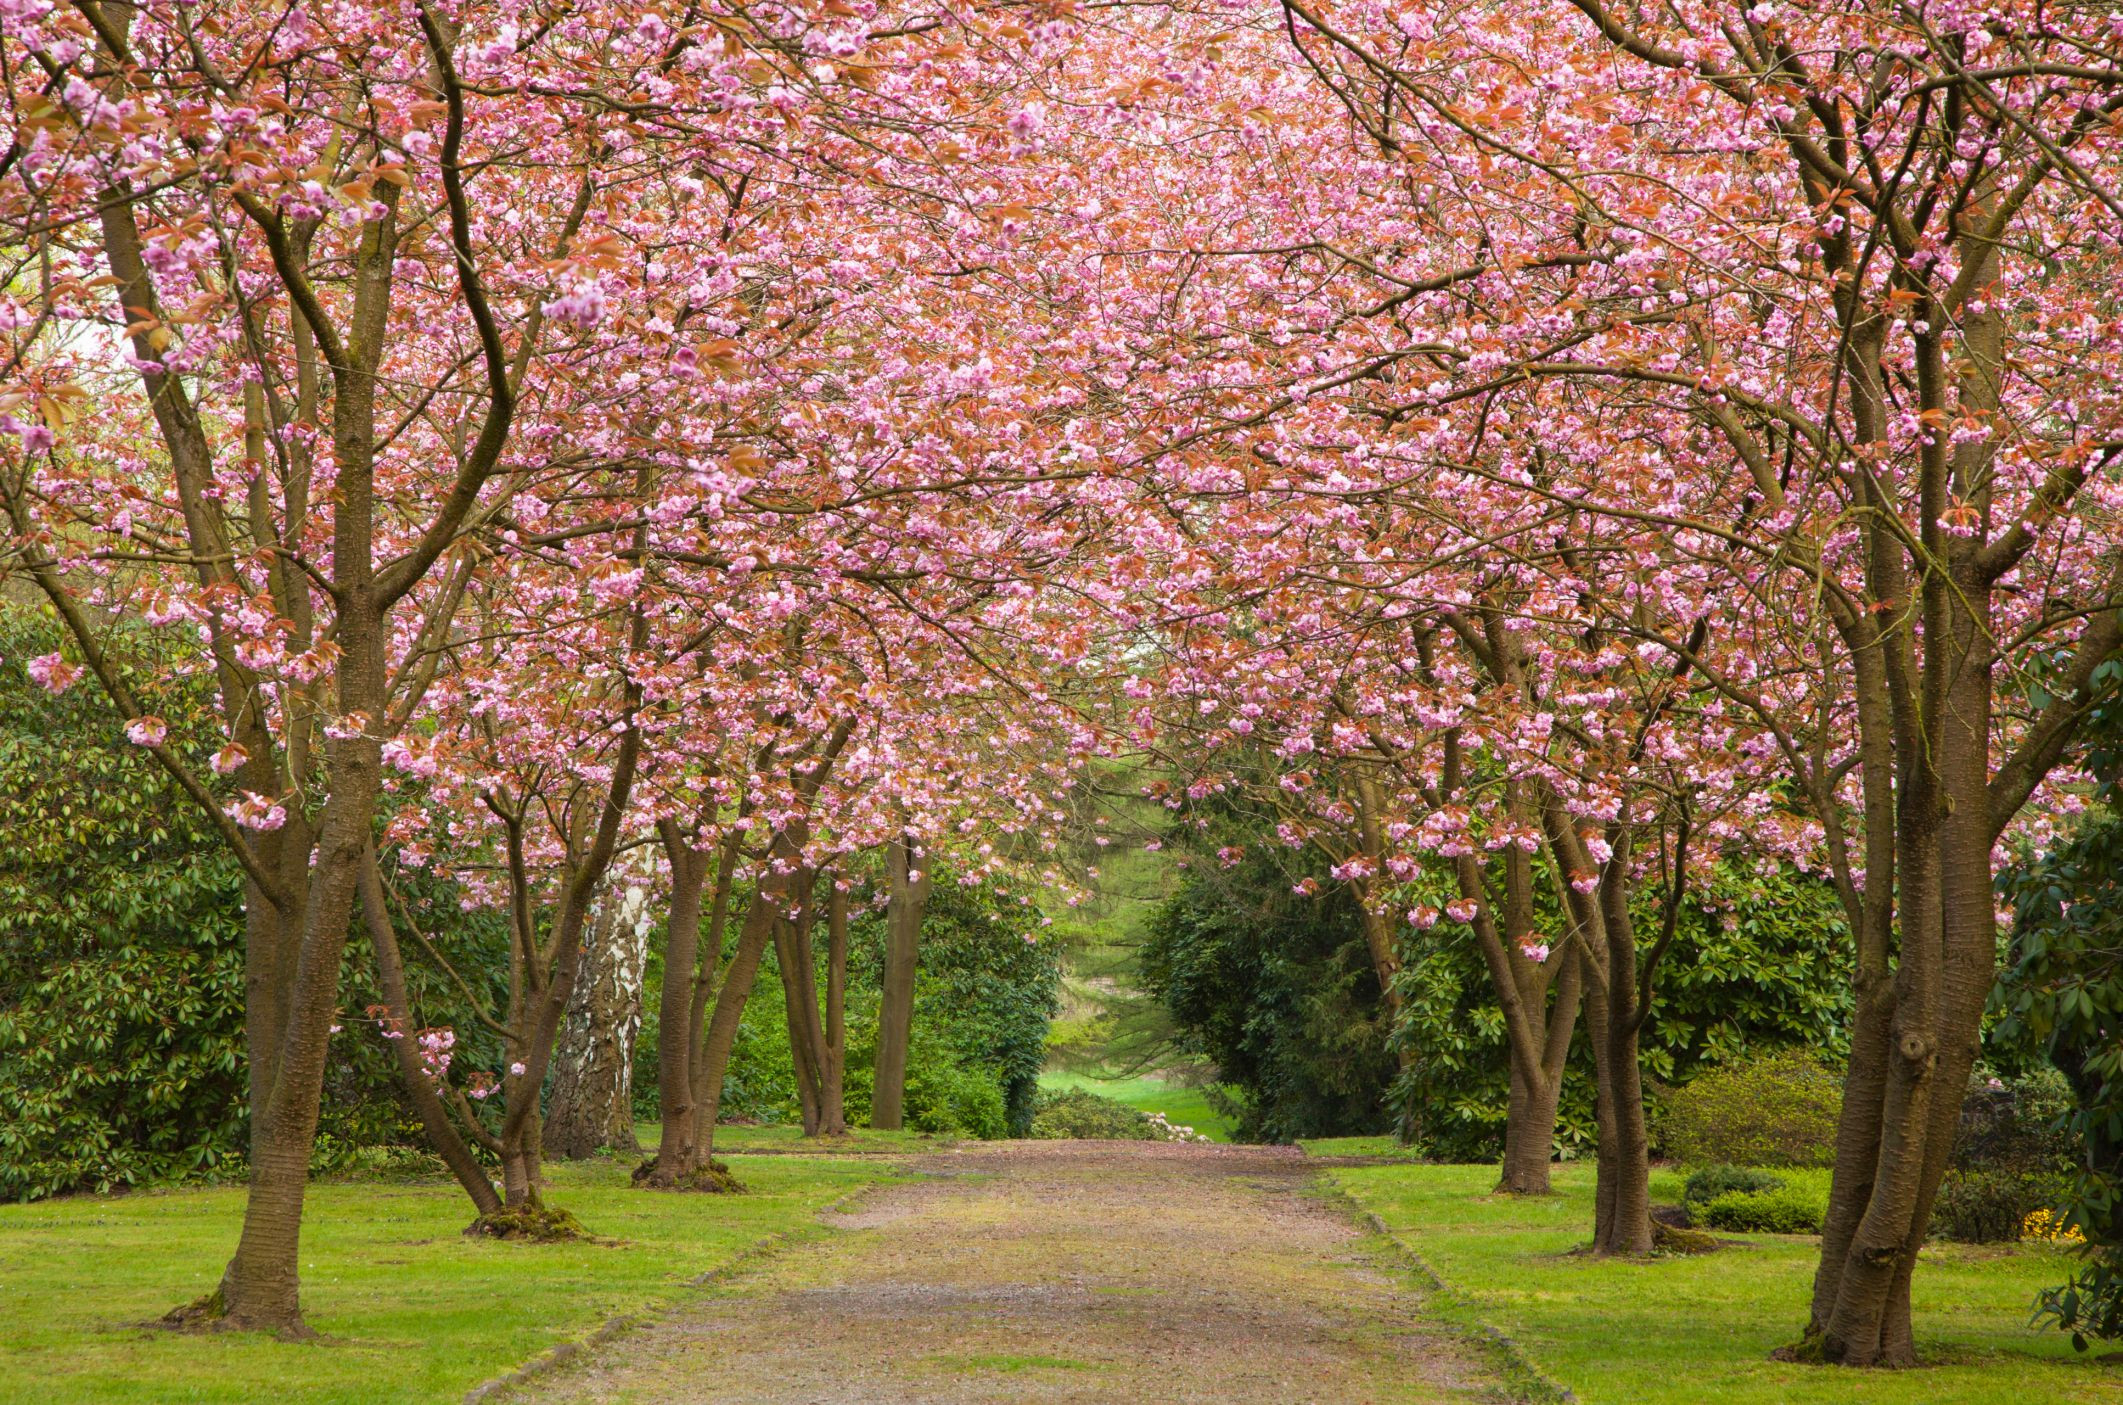 25 Cherry Blossoms Facts – Things You Didn'T Know About Cherry